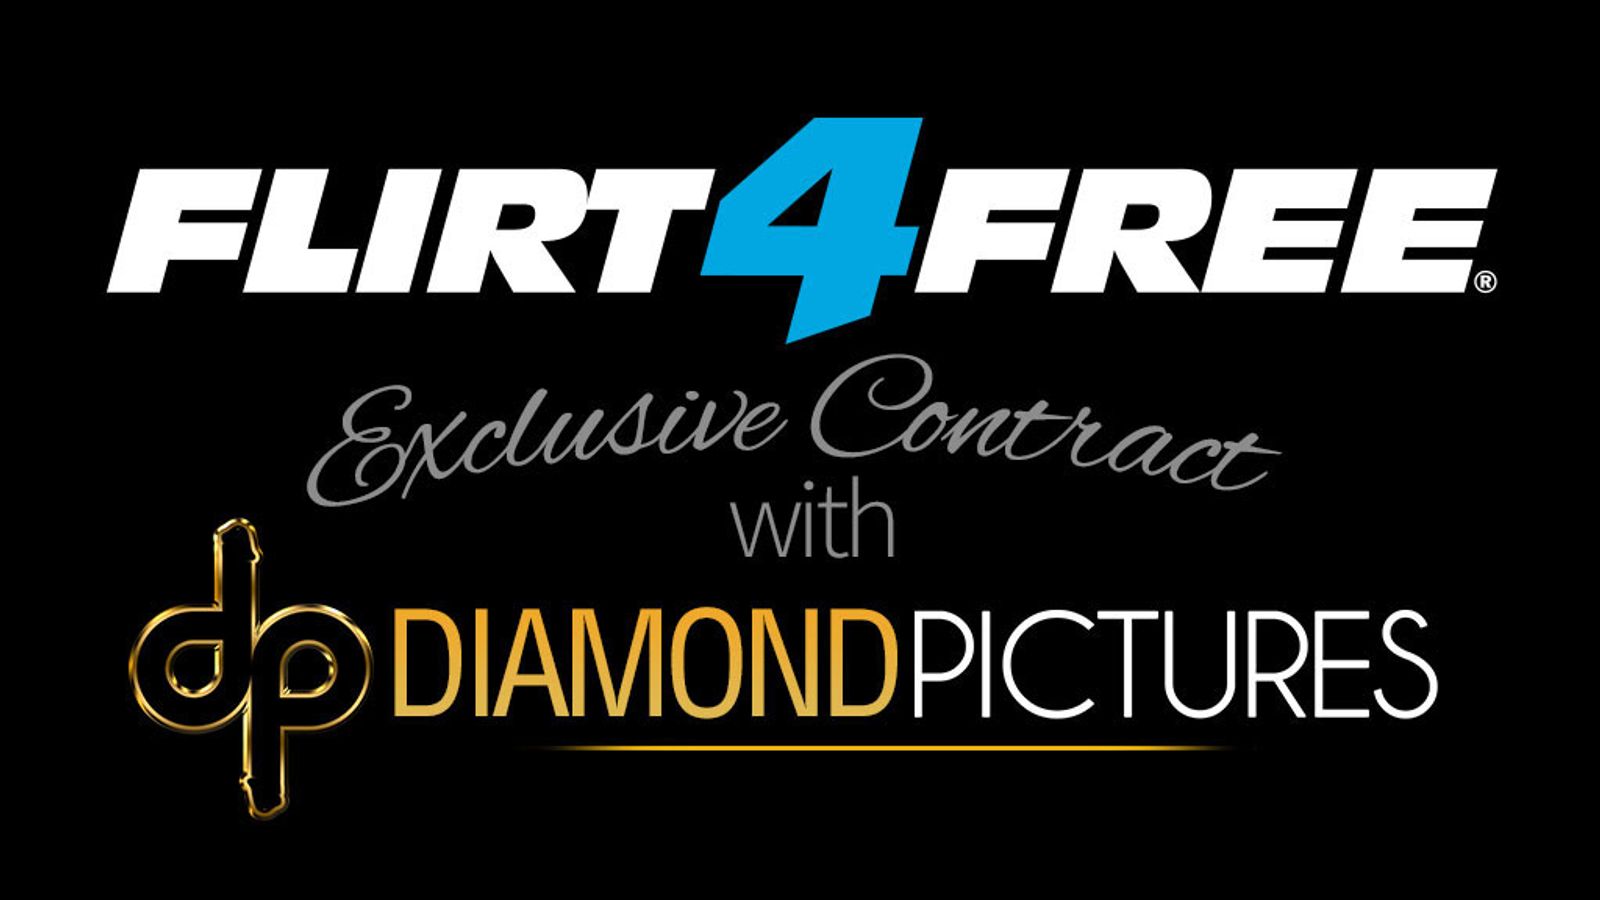 Diamond Pictures Inks Exclusive Deal With Flirt4Free